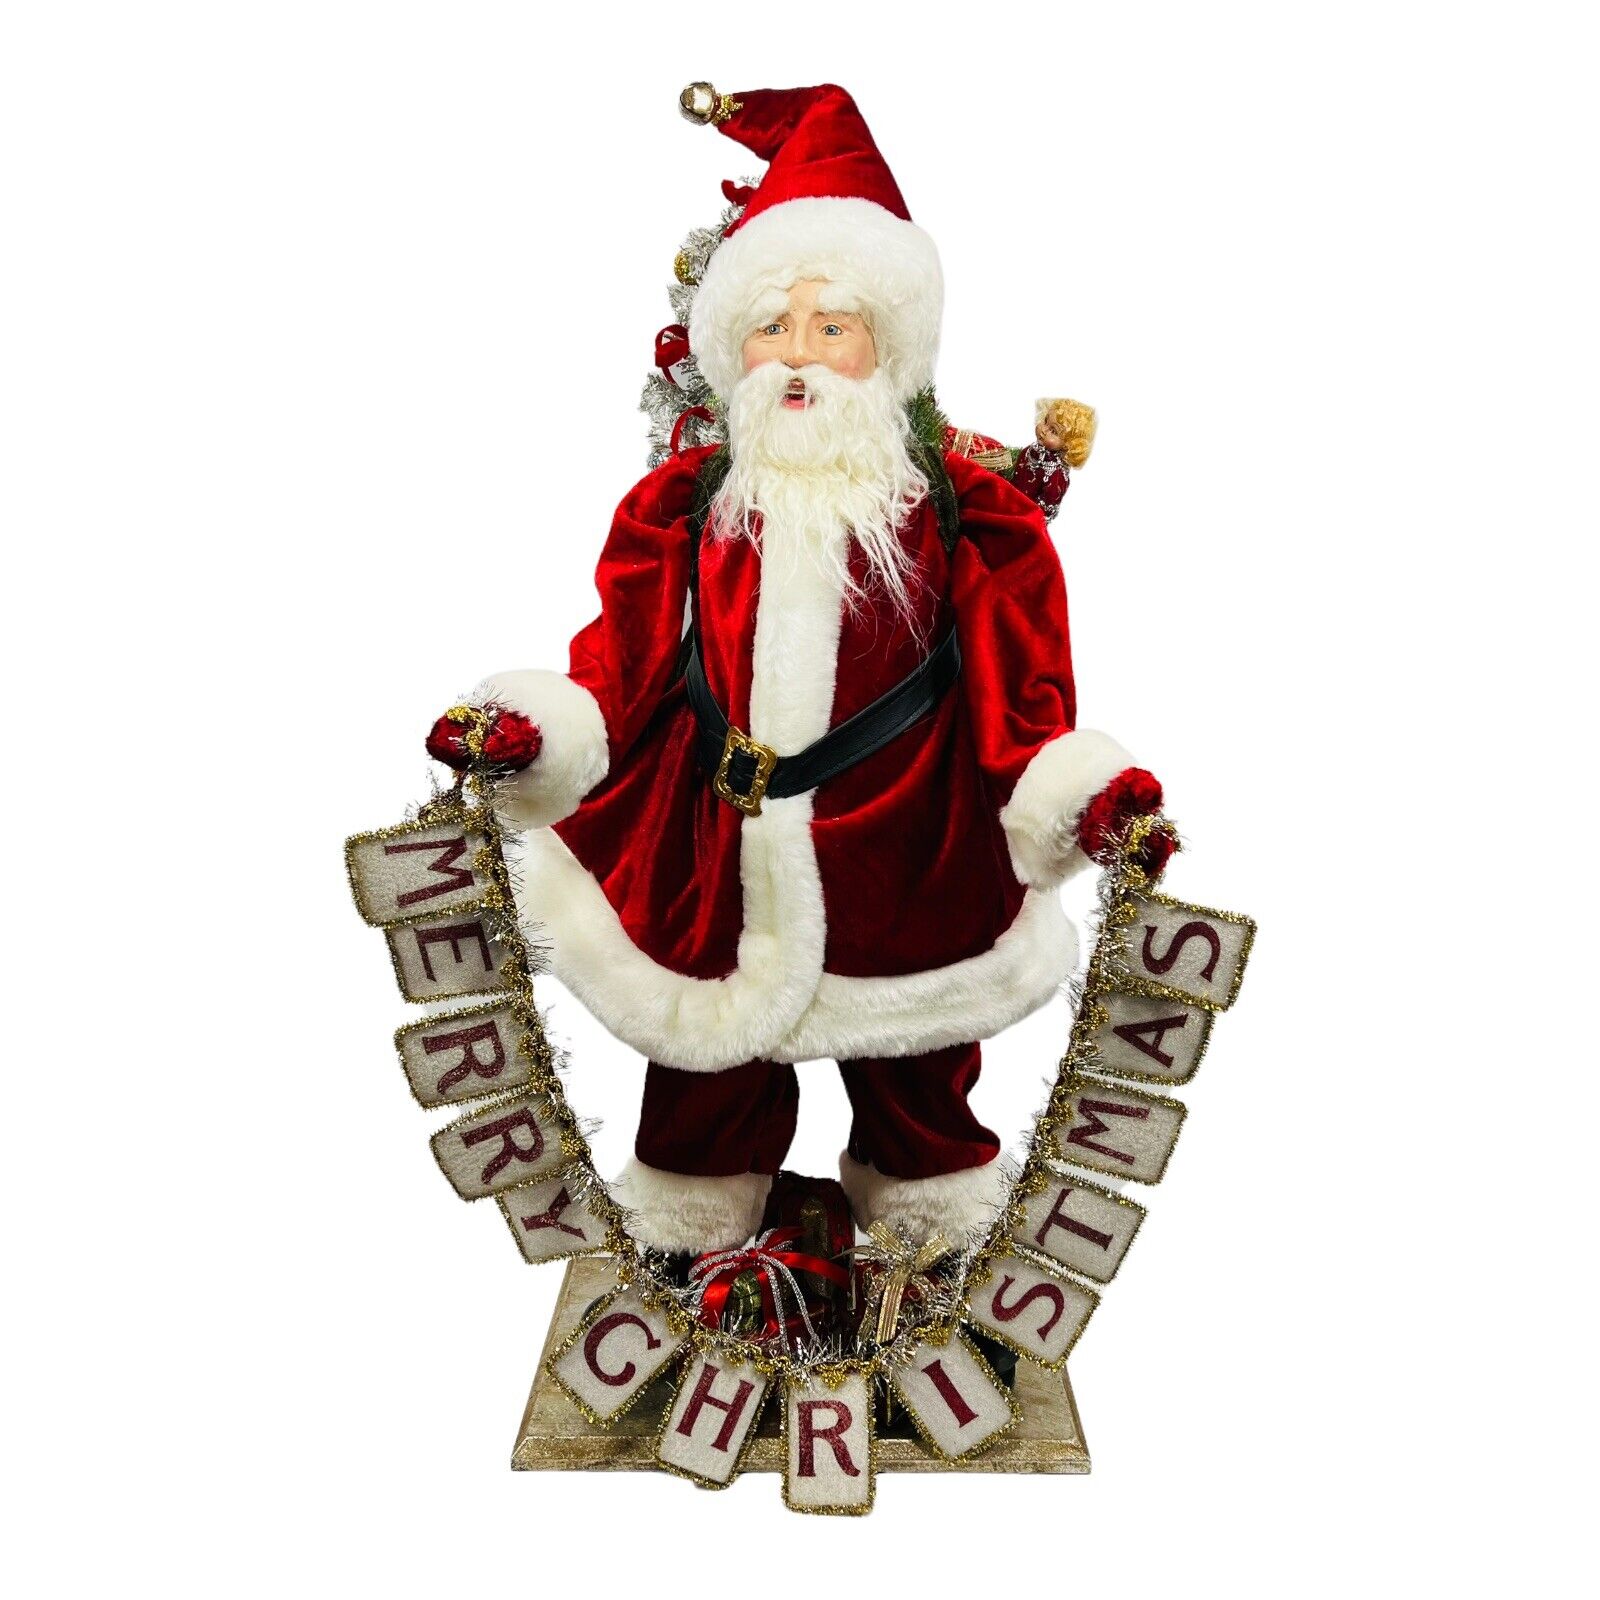 Frontgate Santa Claus 32” Tall Holding Happy Holidays Banner SUPER RARE